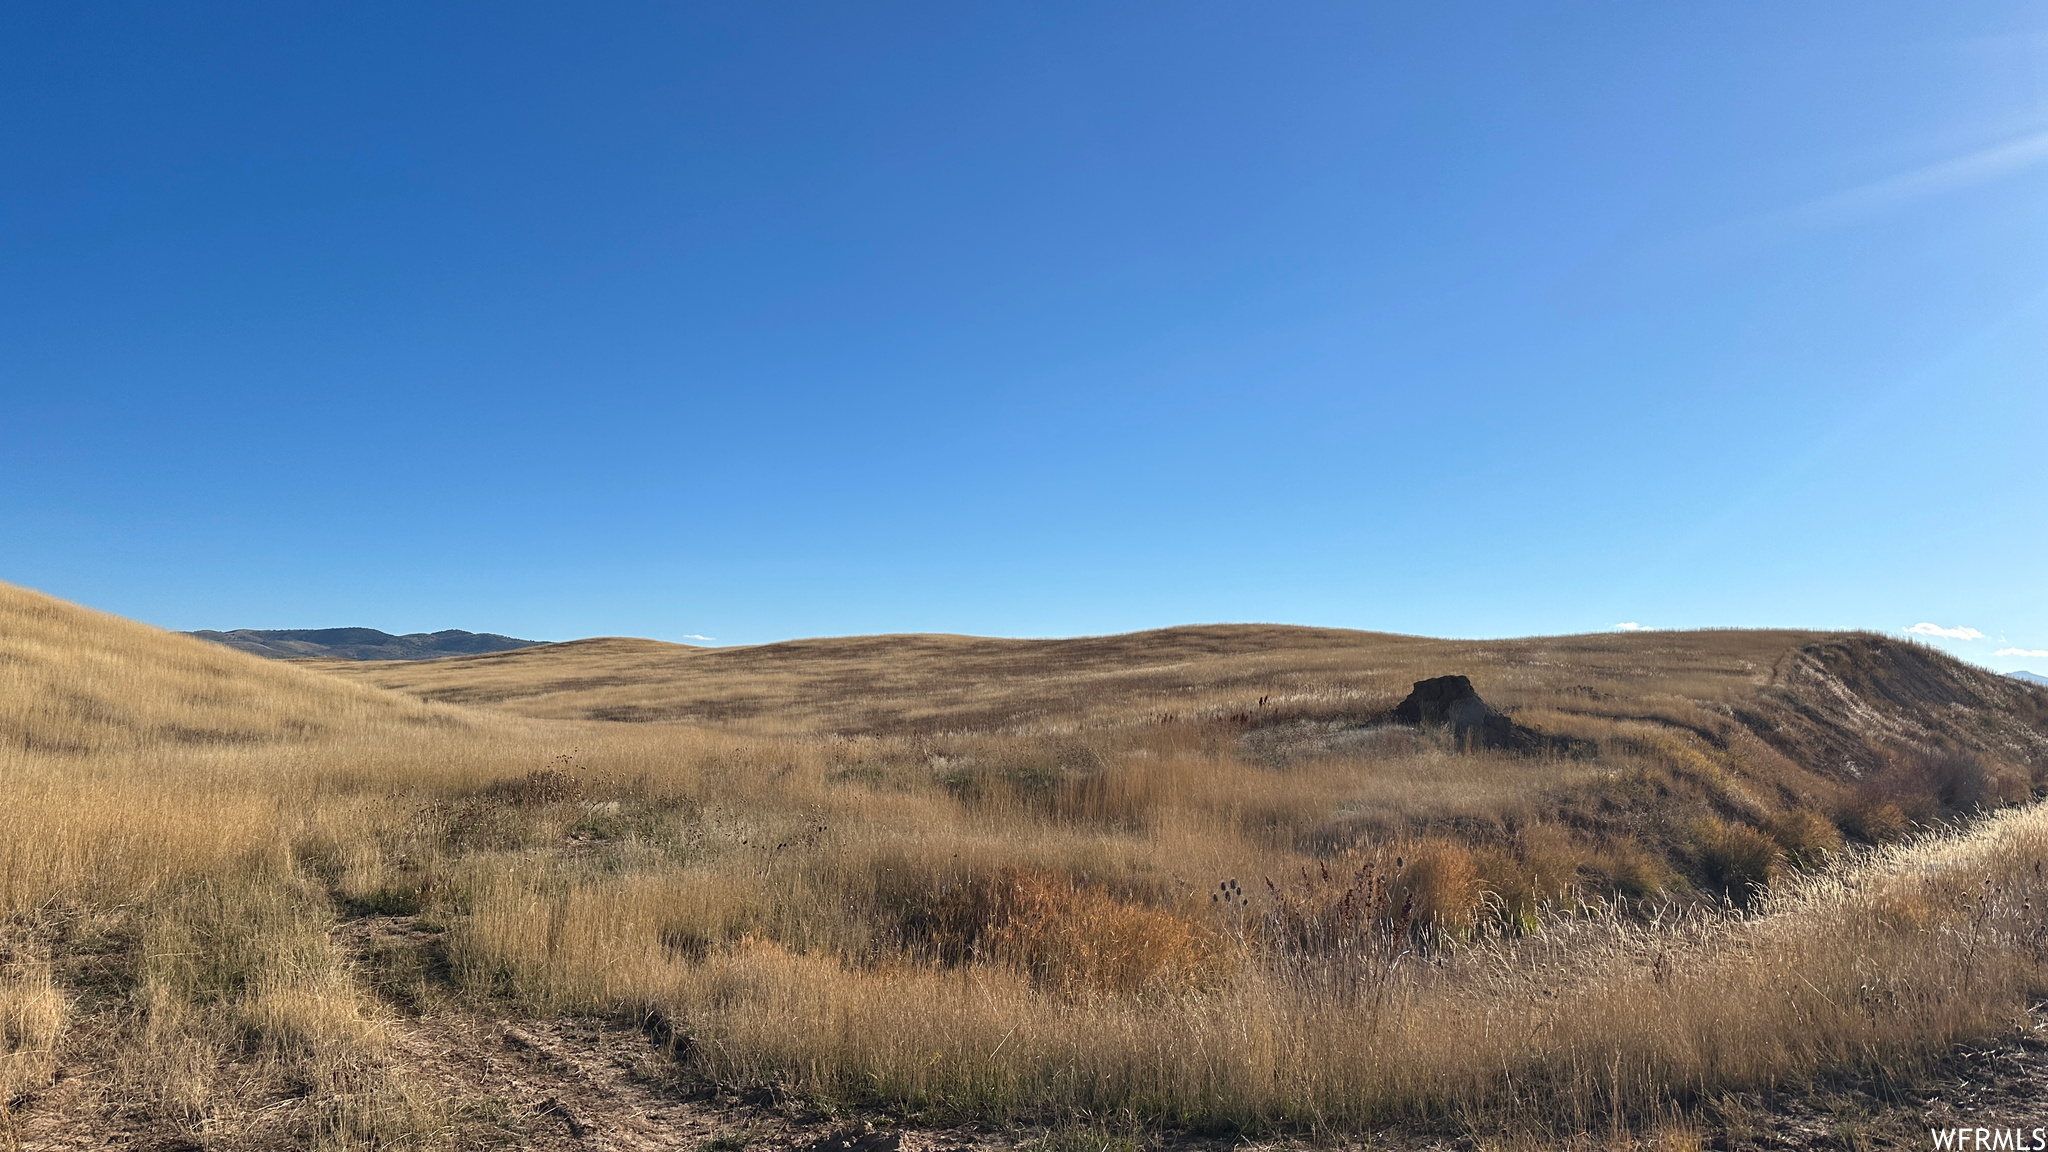 100 W MAIL ROUTE N, Preston, Idaho 83263, ,Land,For sale,MAIL ROUTE,1967722